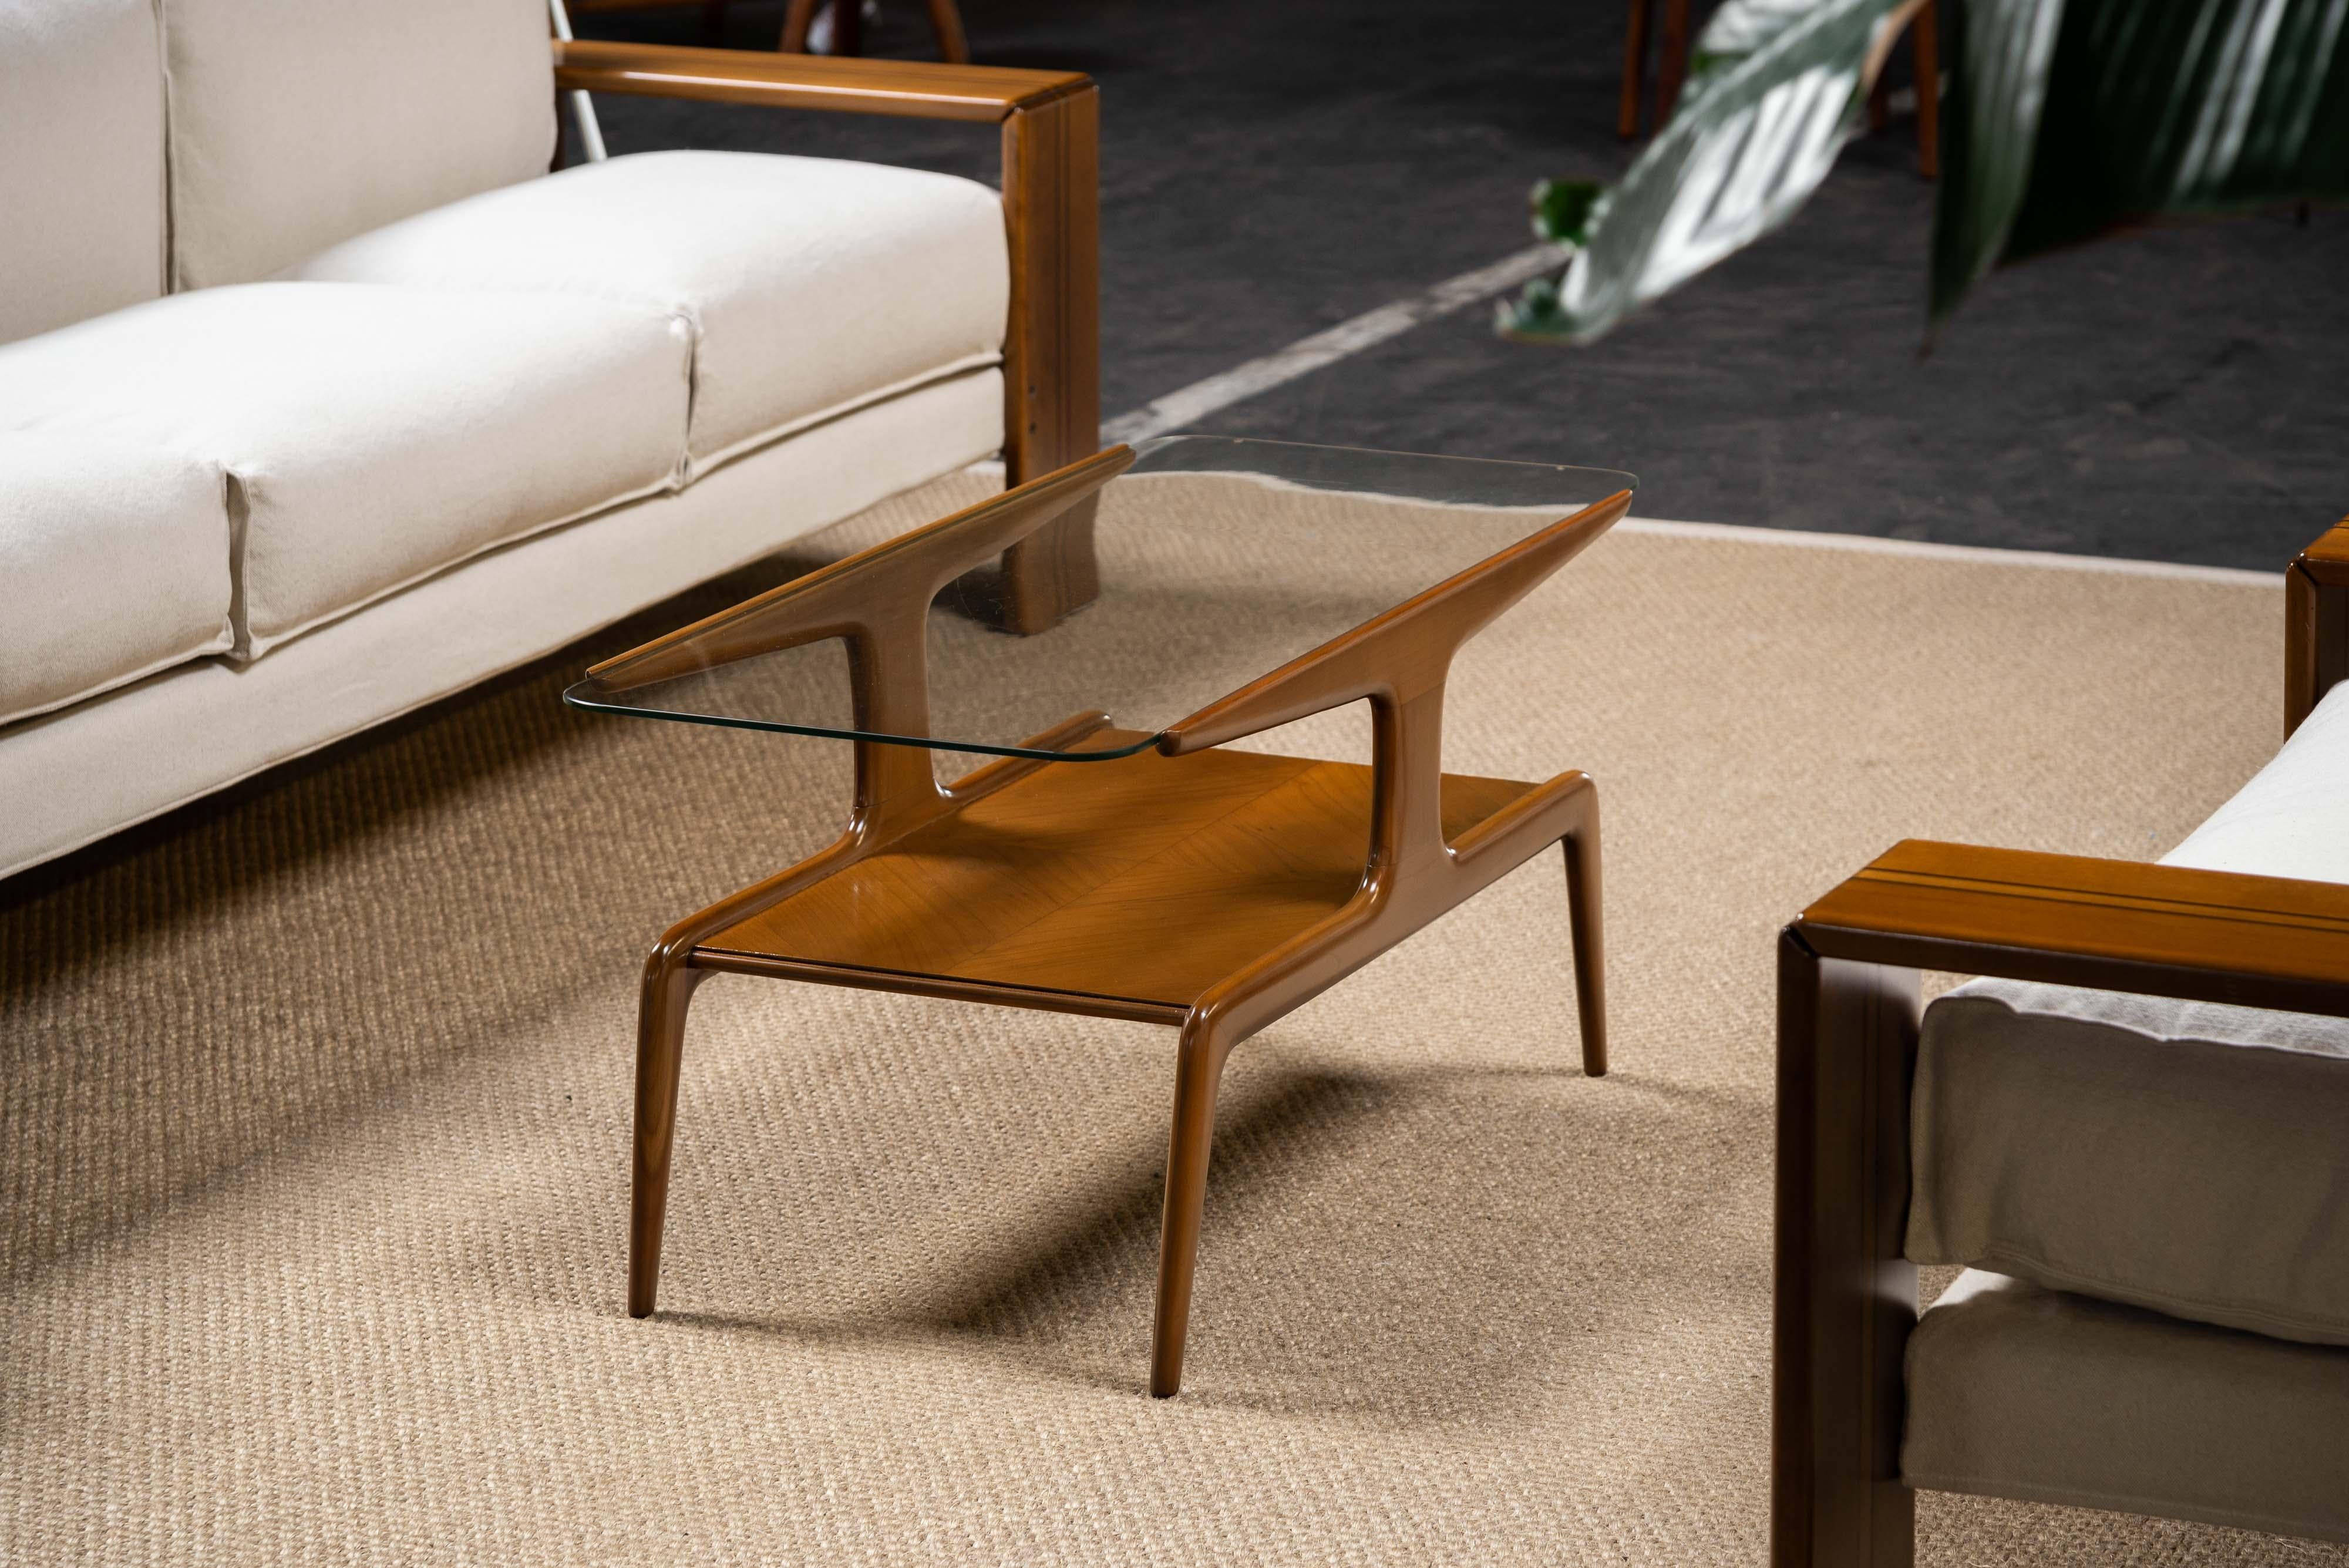 Iconic coffee table by one of the most important Italian architects of all times, Gio Ponti. A solid caramel walnut table crafted by Domus Nova. It's got that classy Gio Ponti shape with on top a sleek glass surface. A beautiful feature is the